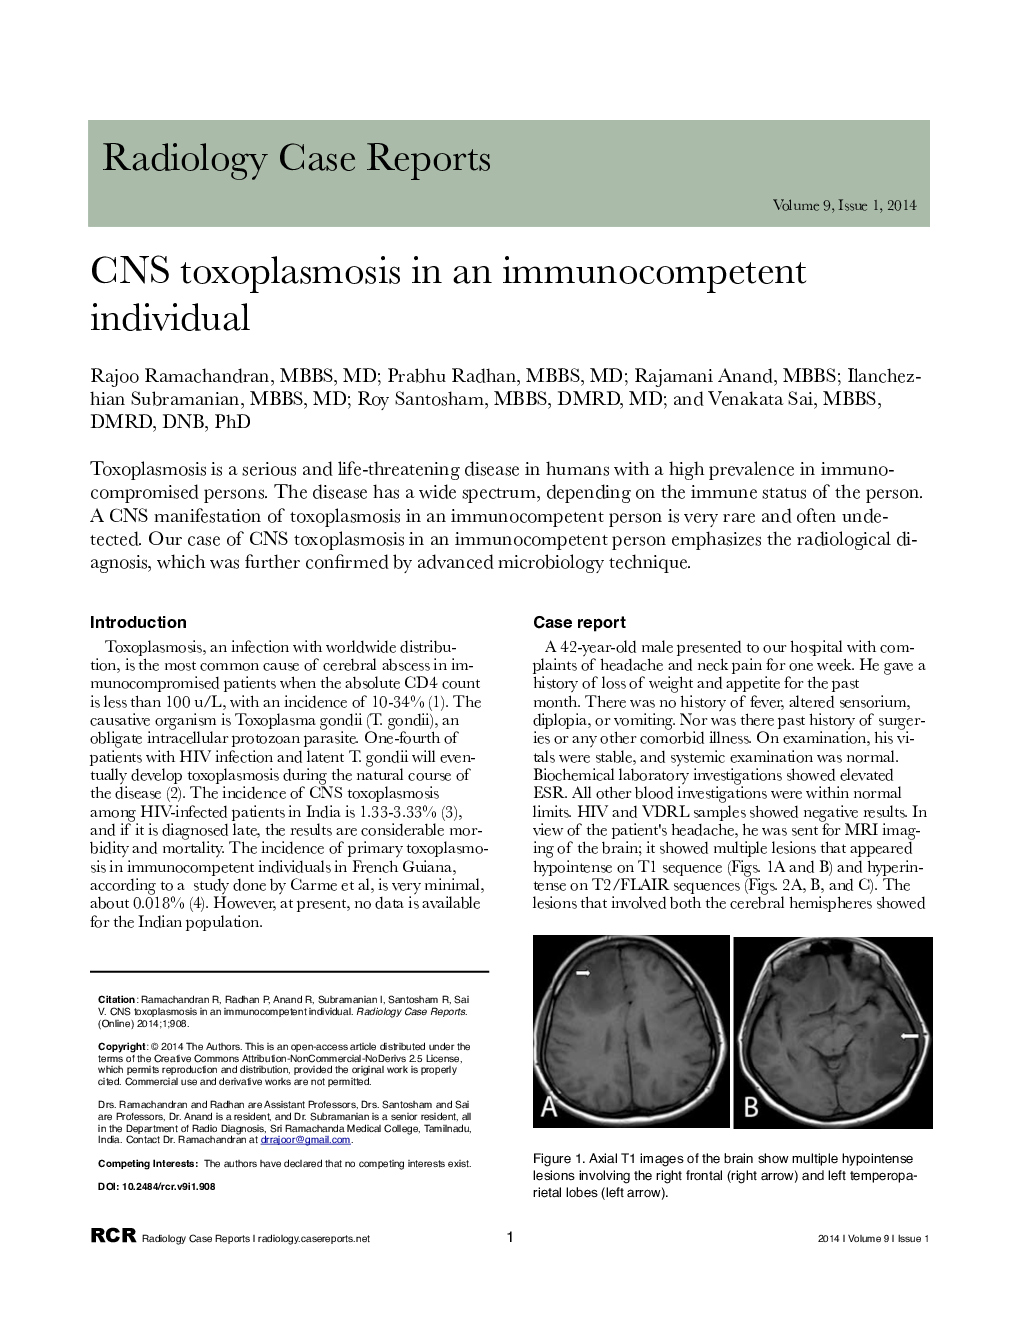 CNS toxoplasmosis in an immunocompetent individual